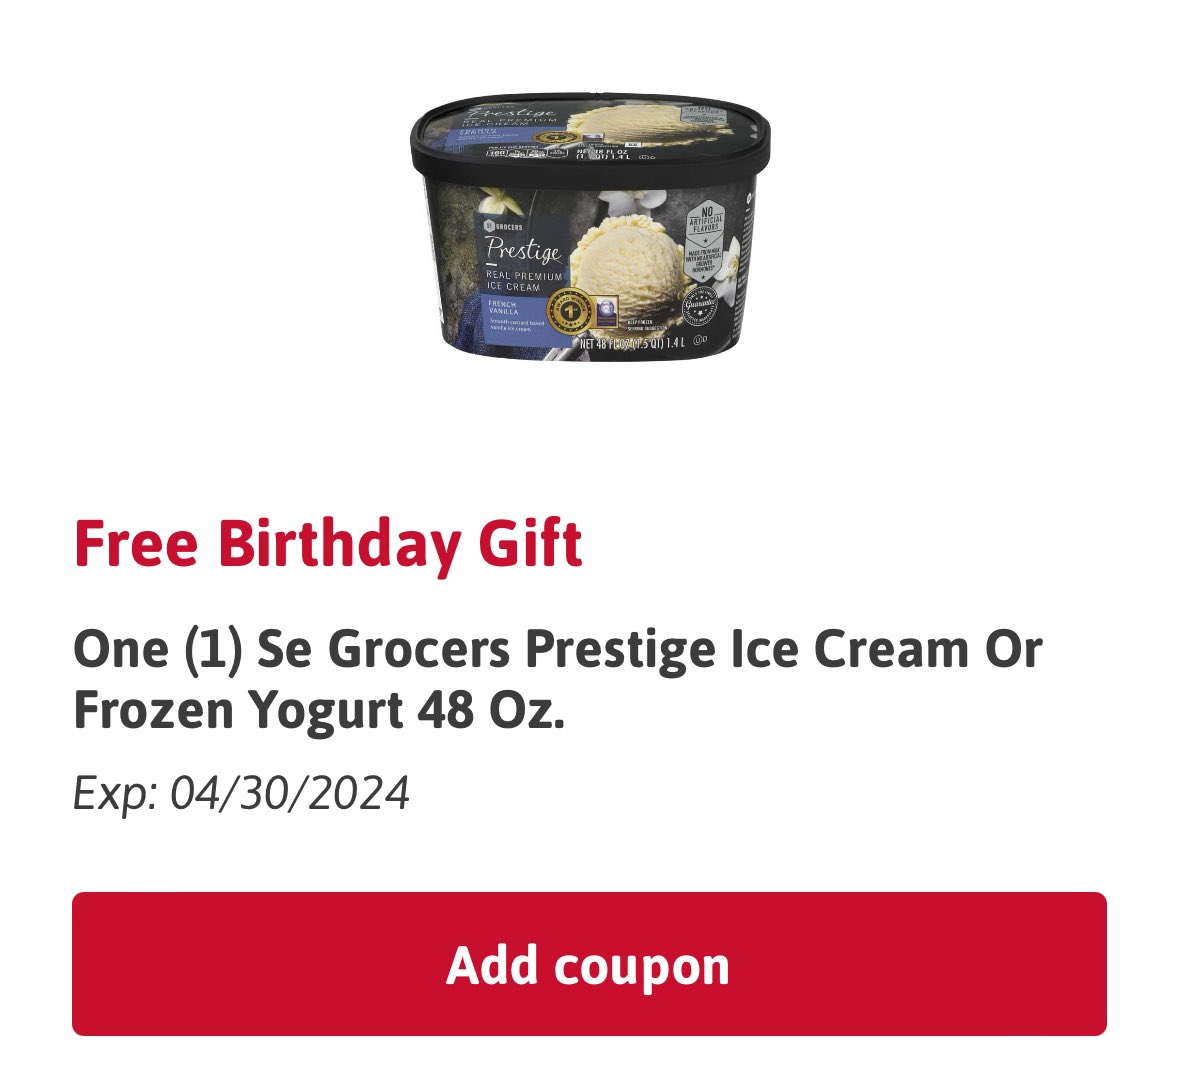 in a world of disappointing birthday coupons @WinnDixie delivers the big boy 48oz ice cream for straight up FREE

love my local grocer hope aldi never ends u